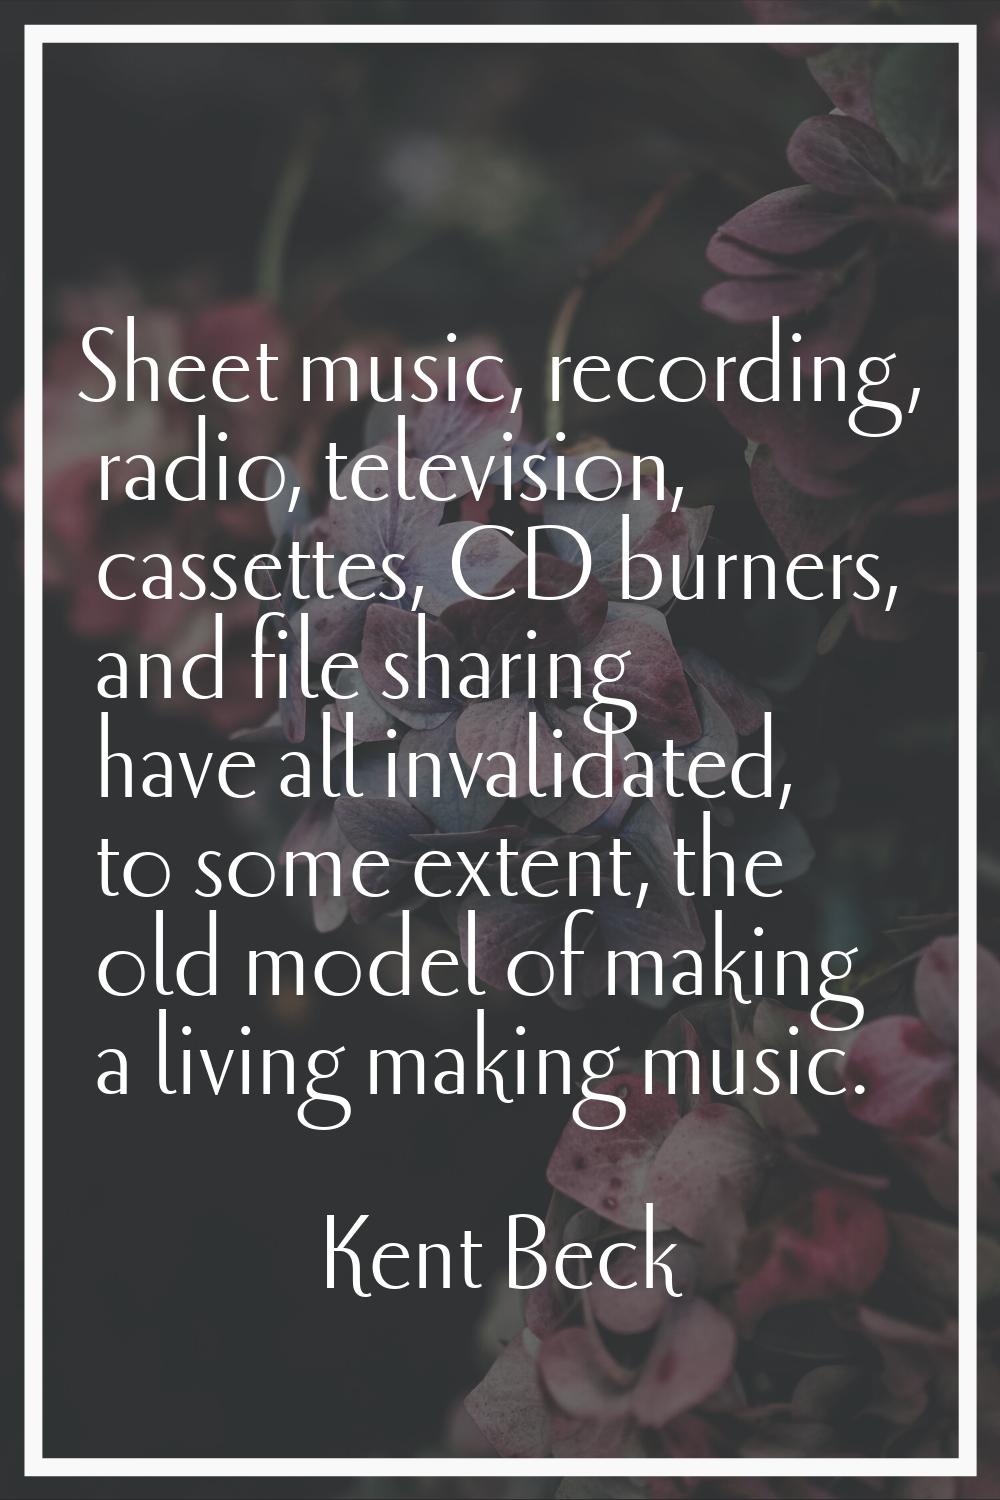 Sheet music, recording, radio, television, cassettes, CD burners, and file sharing have all invalid